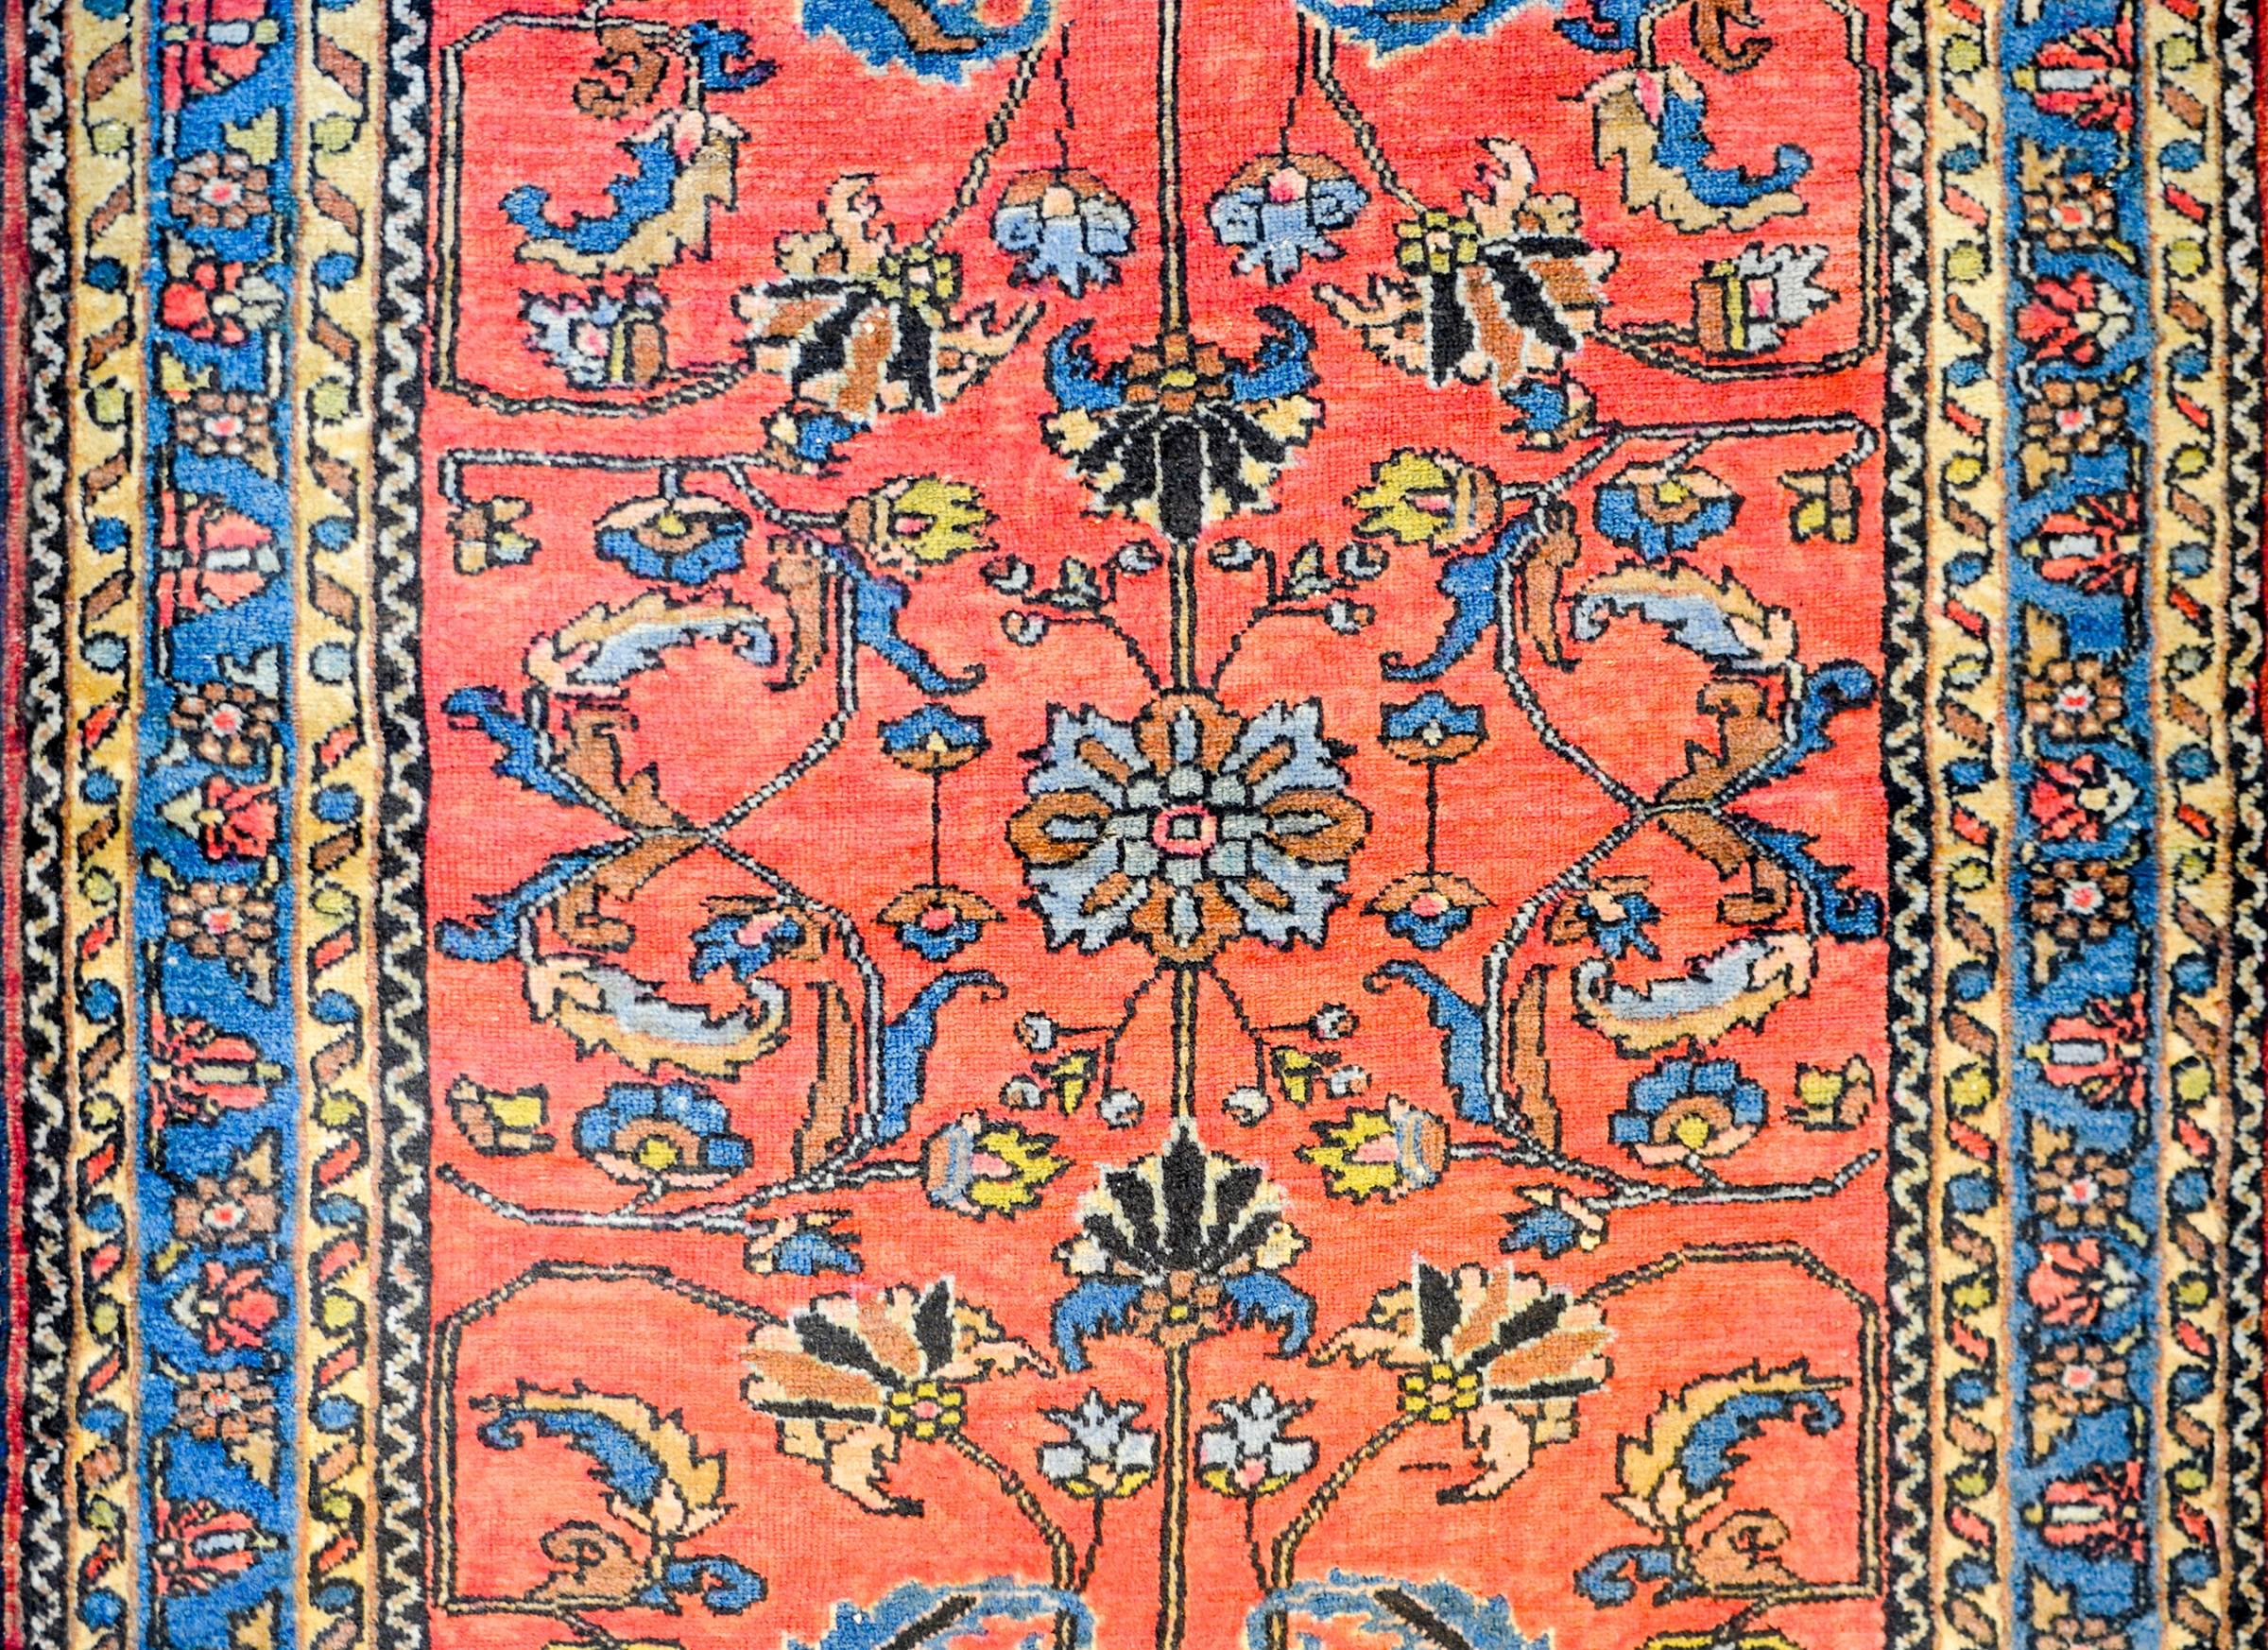 An early 20th century Persian Lilihan rug with a beautiful mirrored tree-of-life pattern woven in indigo, orange, yellow and pink vegetable dyed wool on a salmon colored background. The border is contrasting with a petite floral and leaf pattern